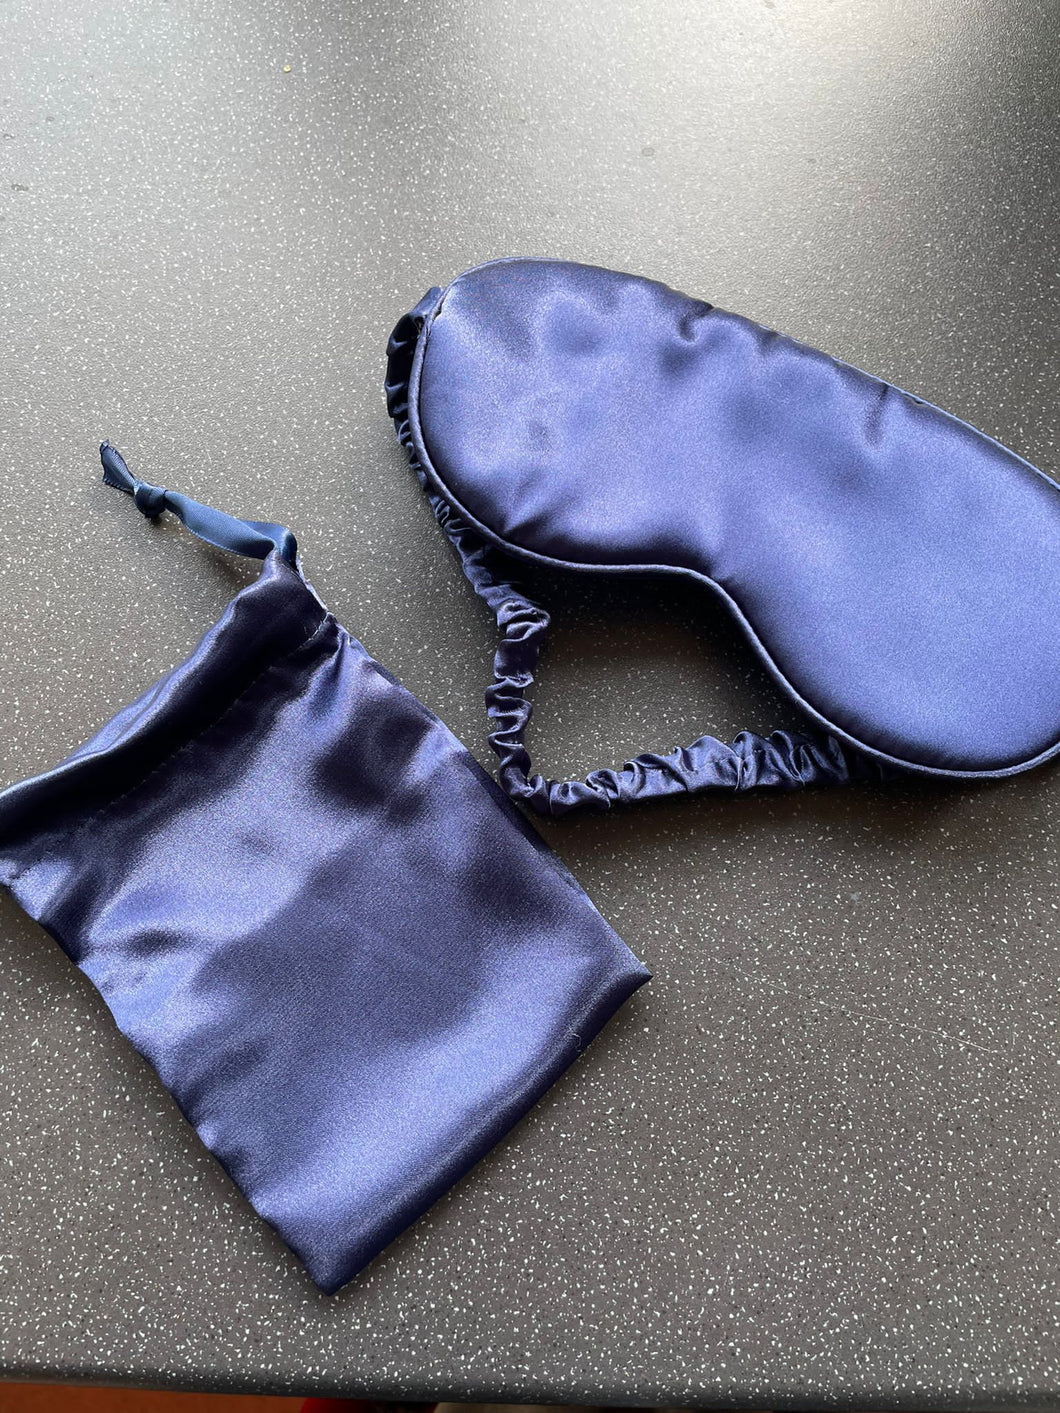 Good Sleep and Boost Intuition Sleep Eye Mask Blue Satin With Pouch For Under Pillow